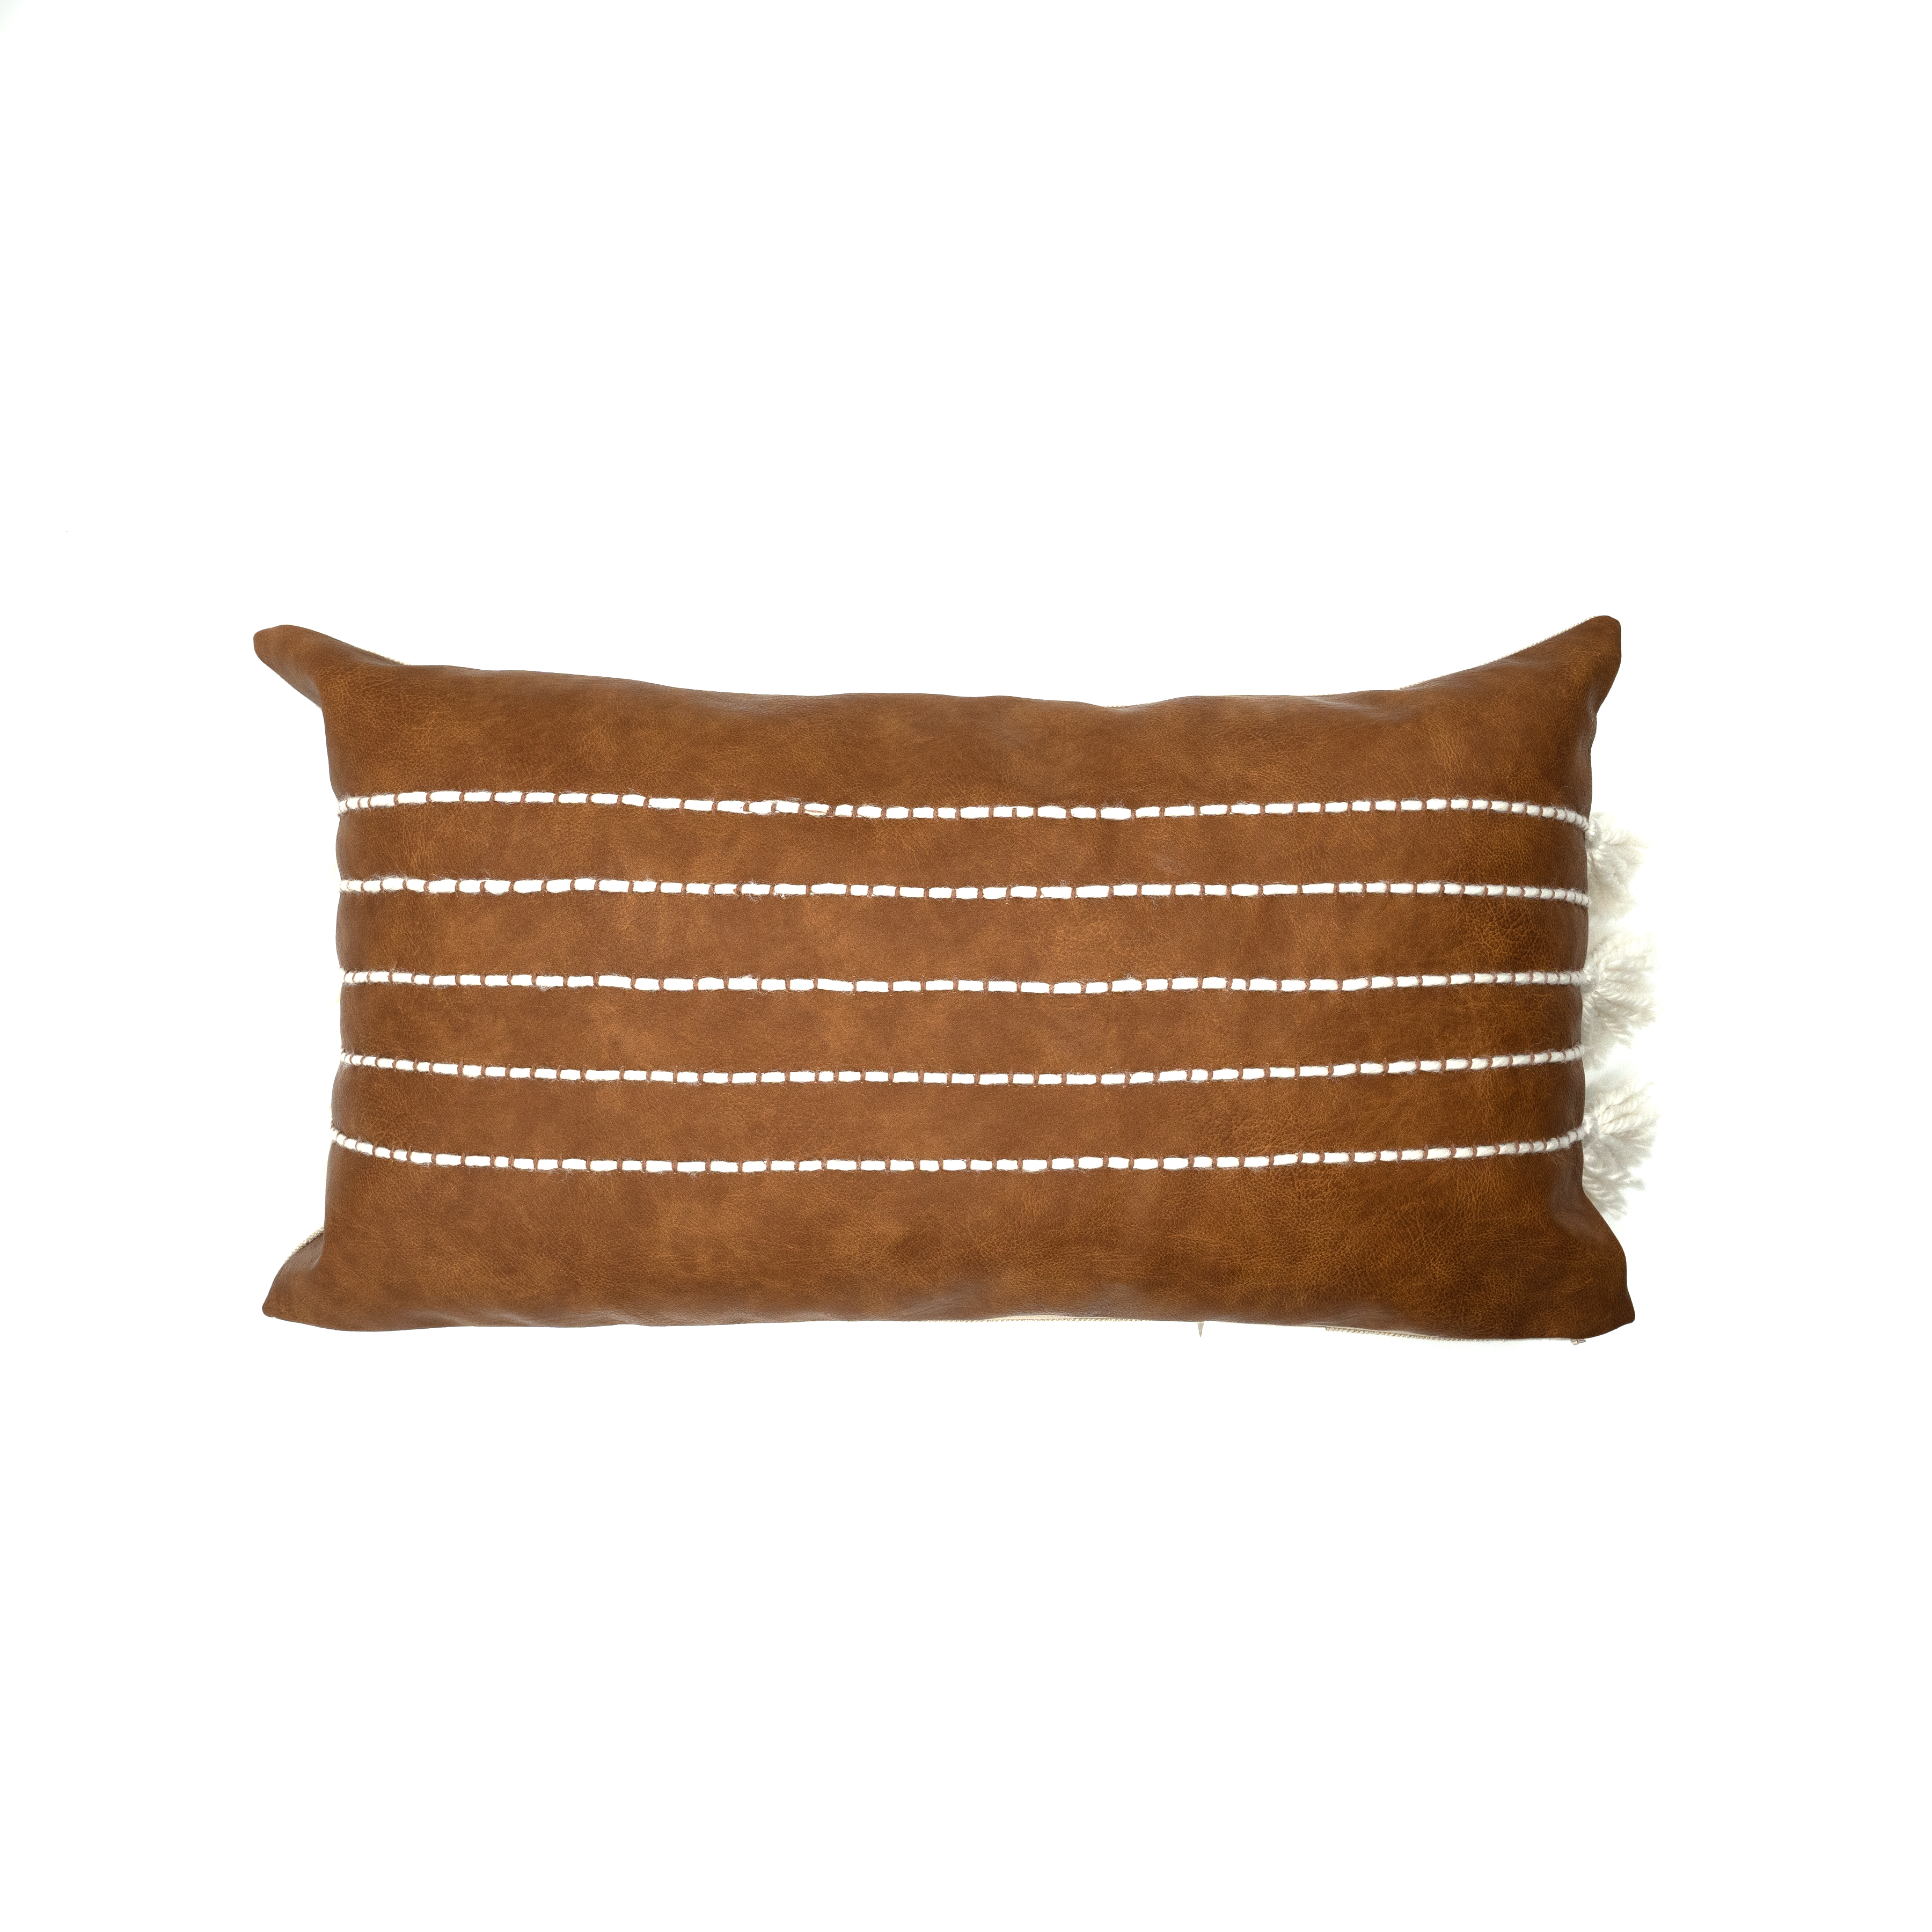 Vegan Leather Pillow with Tassels